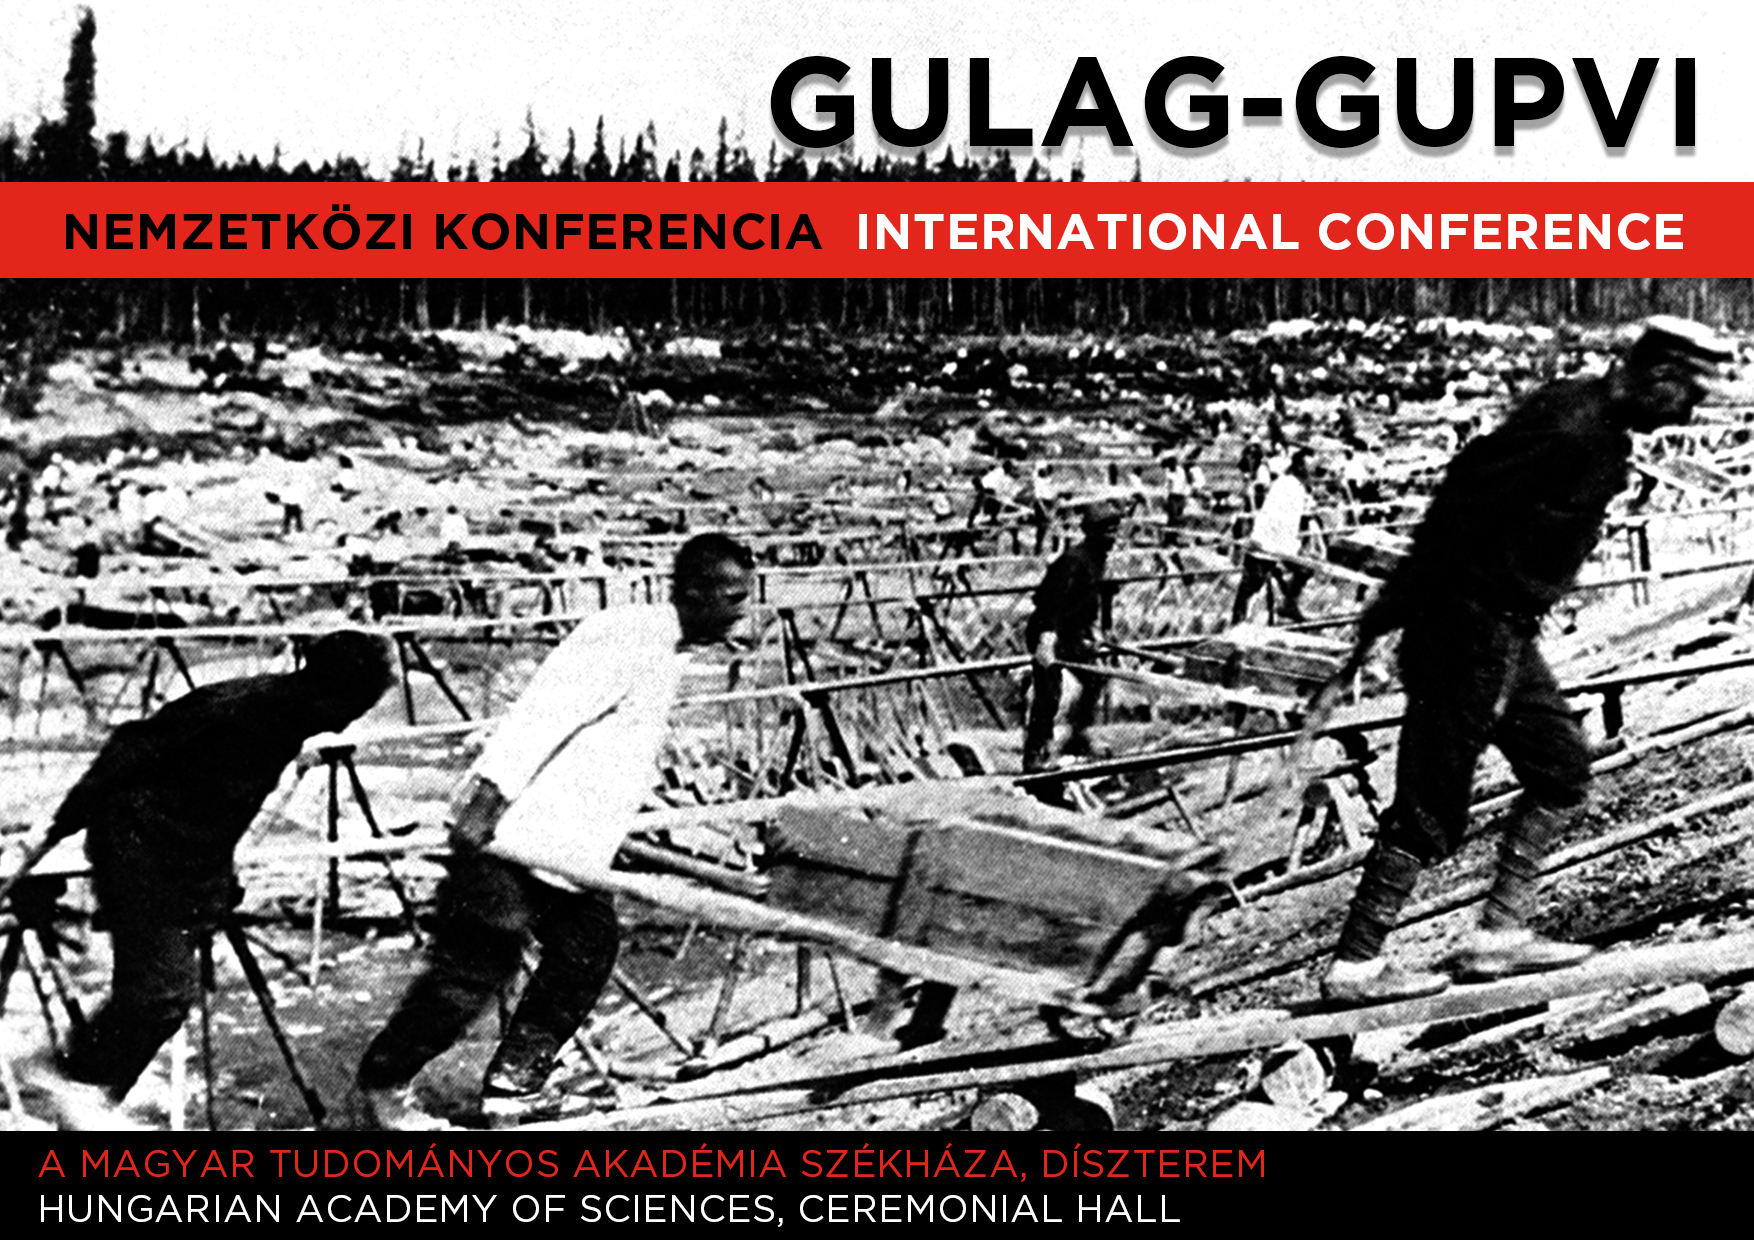 Conference Gulag-Gupvi. The Soviet Captivity in Europe